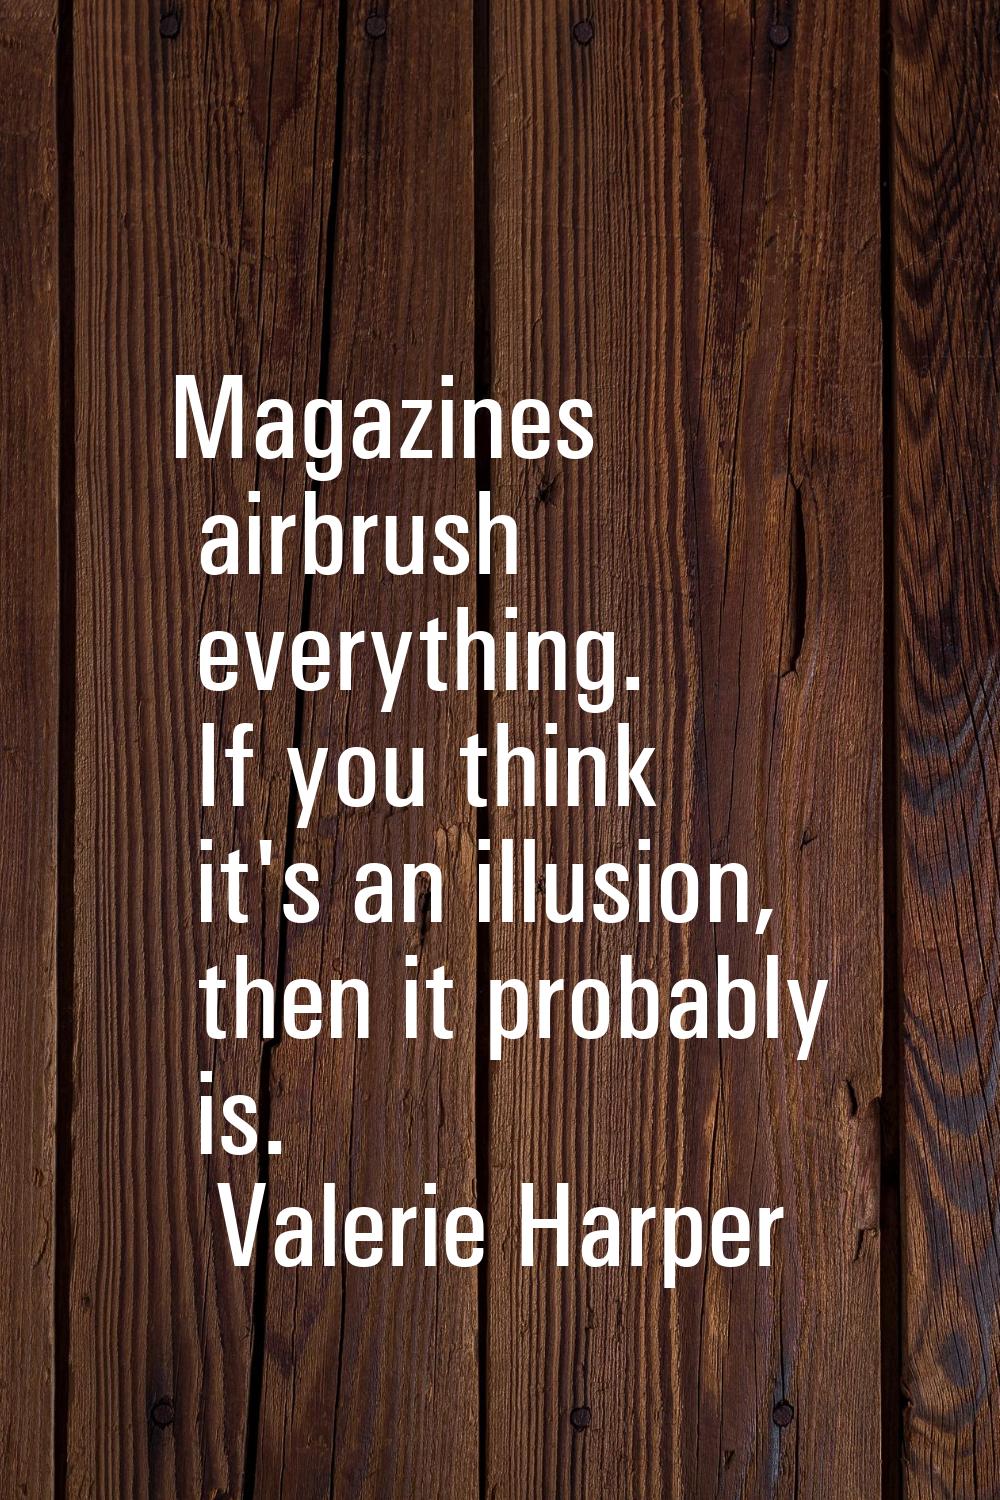 Magazines airbrush everything. If you think it's an illusion, then it probably is.